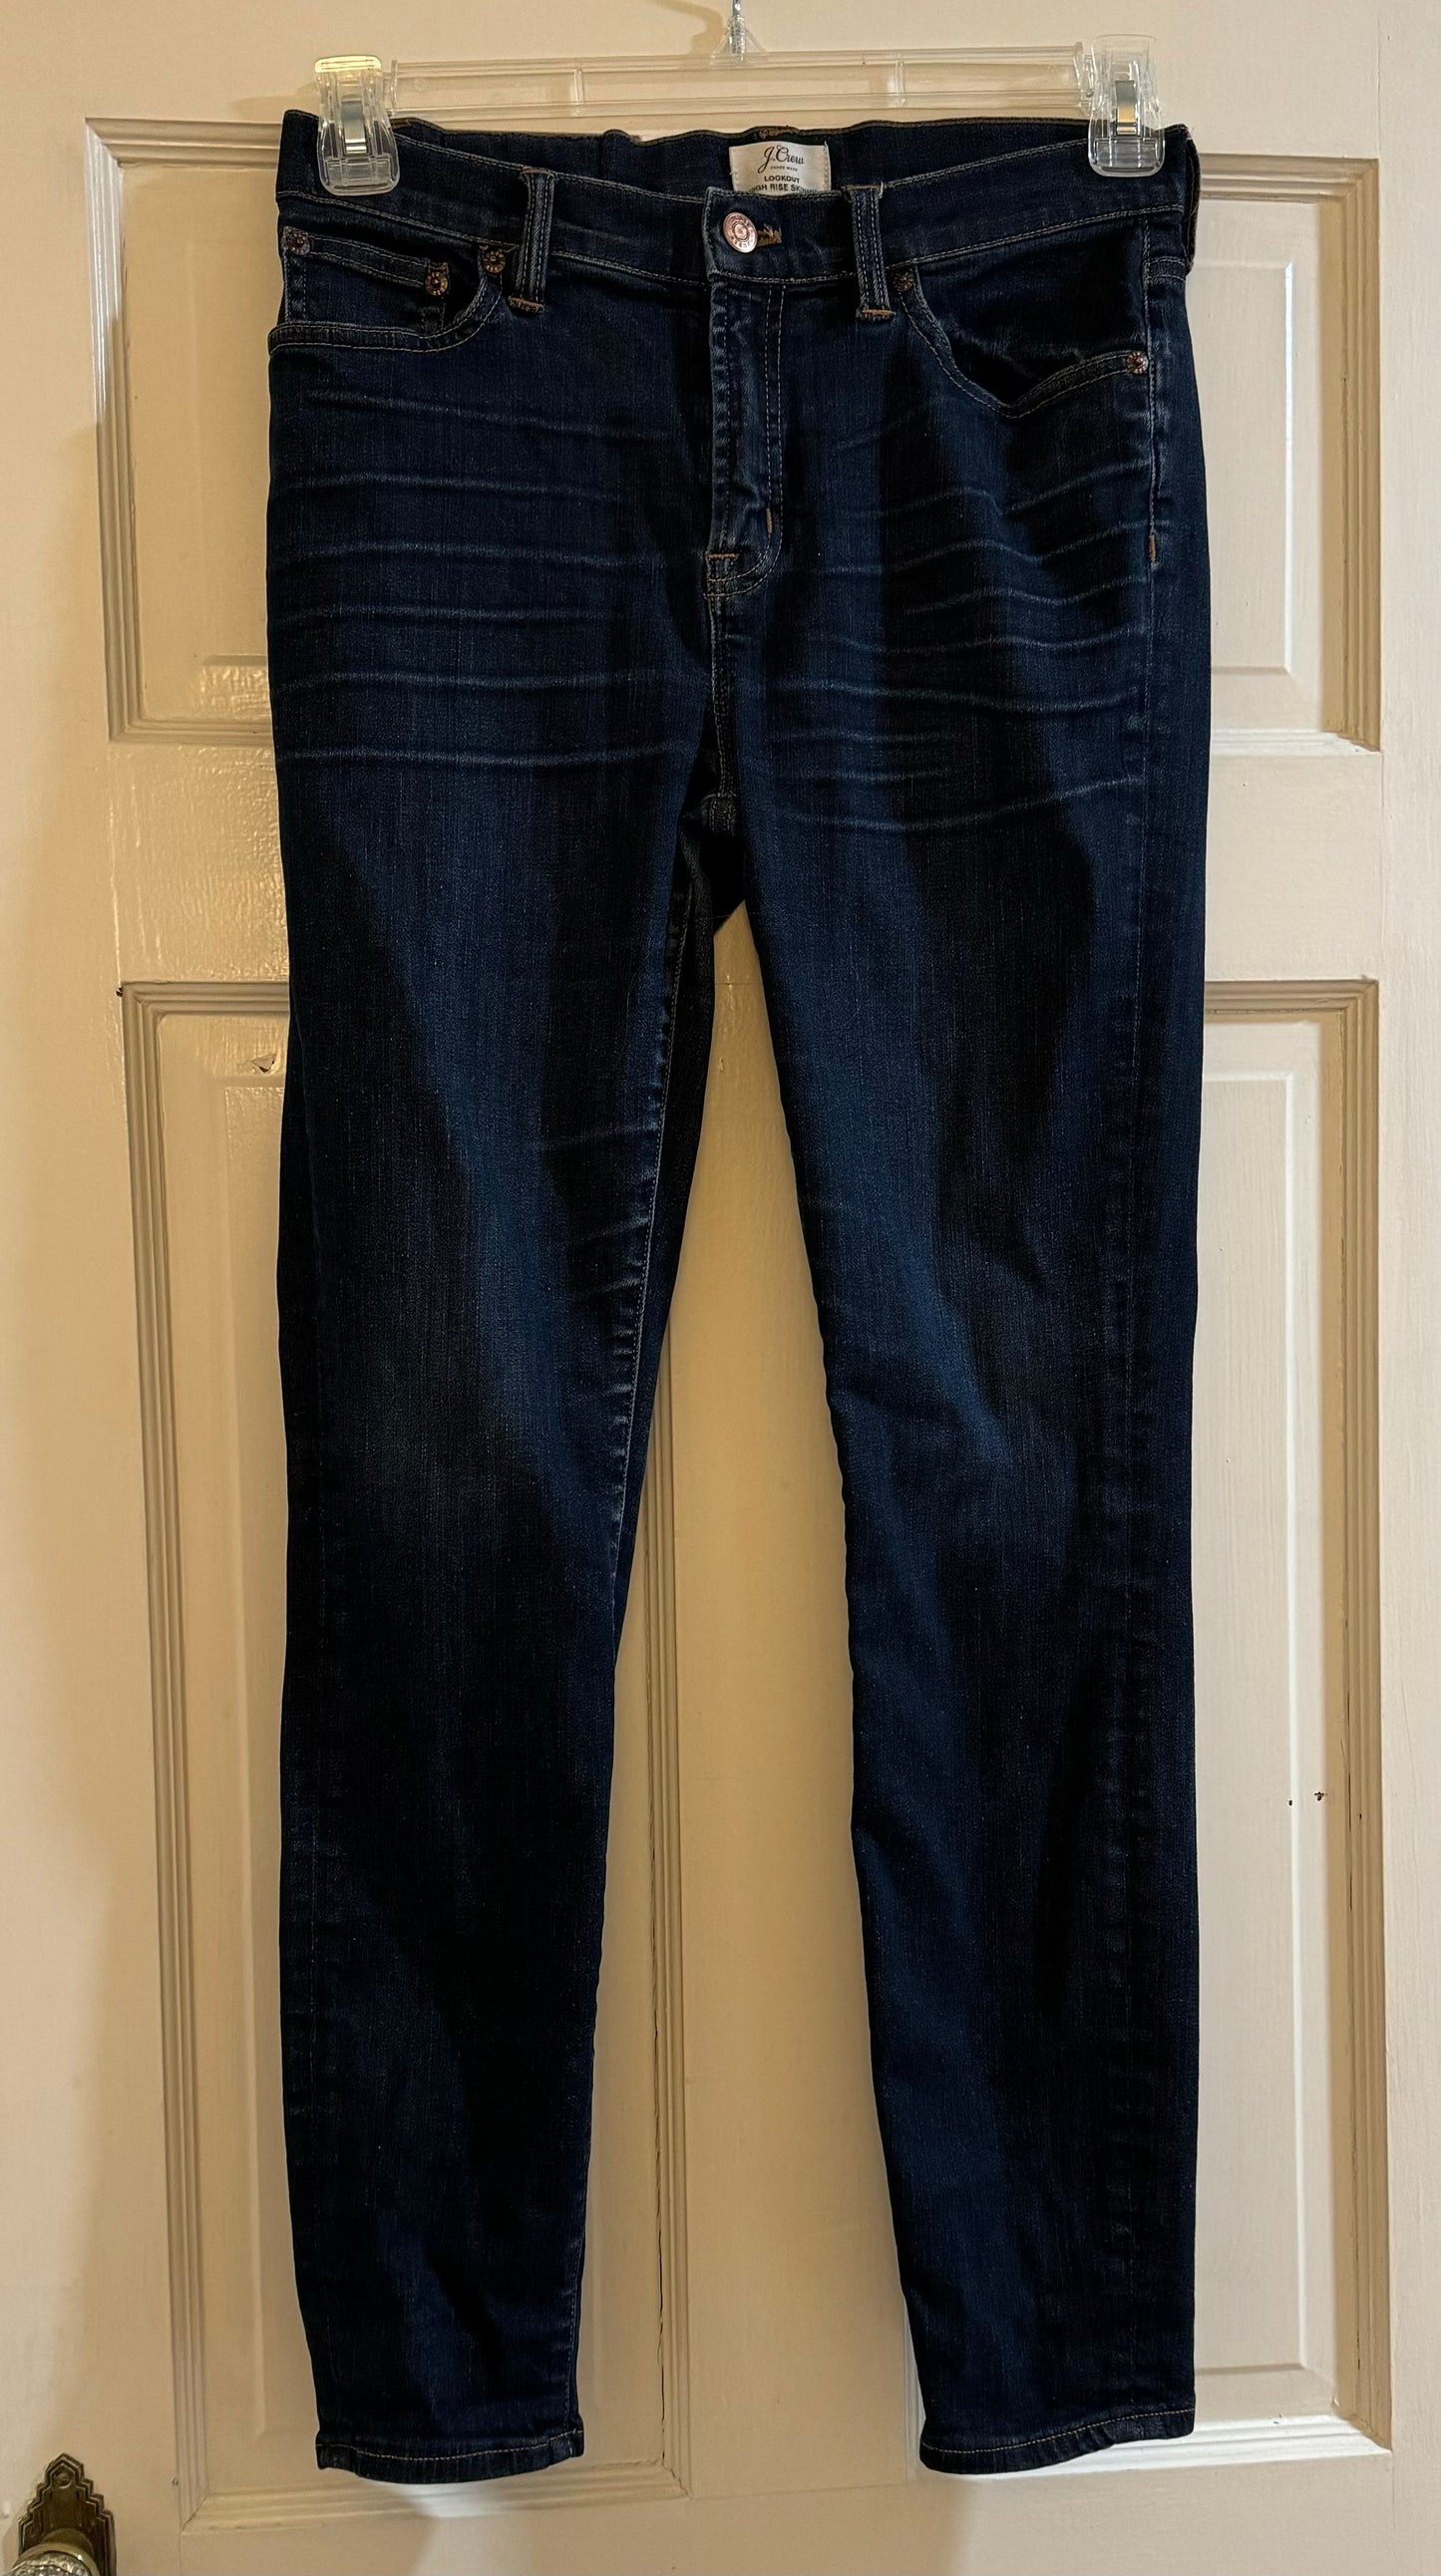 28 Women’s J. Crew Lookout High Rise Skinny Jeans